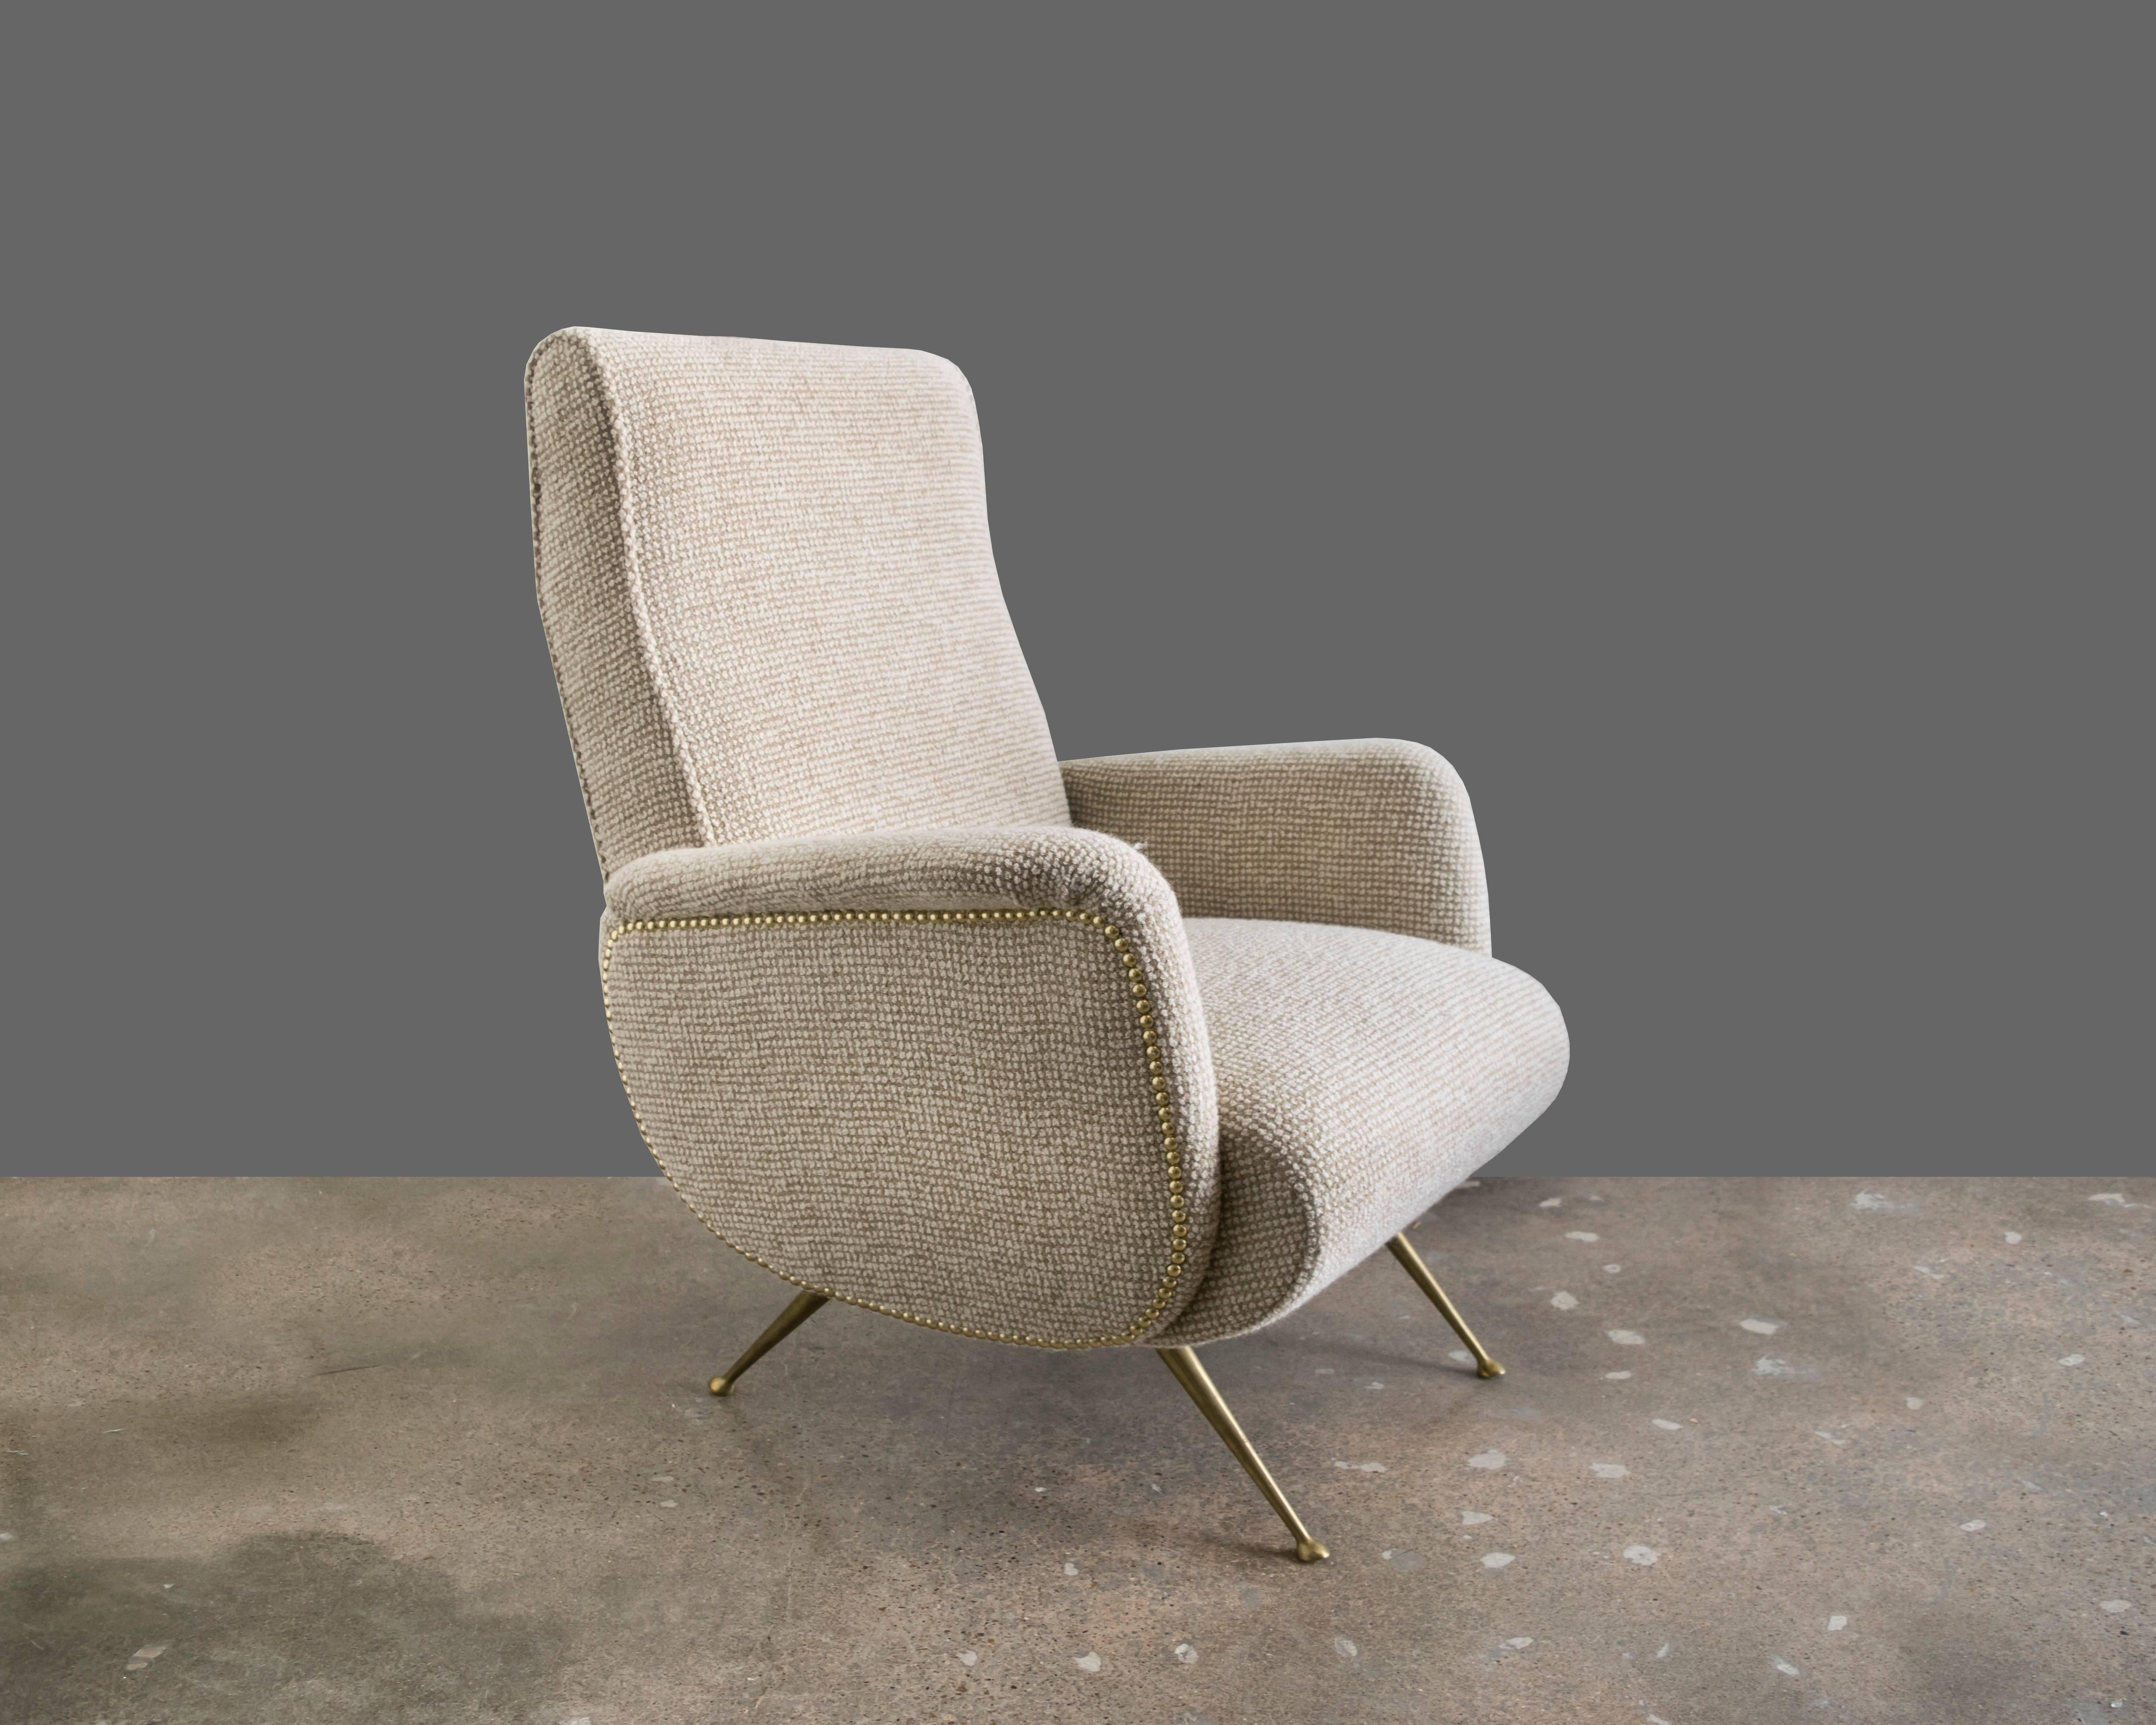 Gorgeous sculptural Italian armchair made by Arflex in the 1950s and thought to be designed by Marco Zanuso. Recently upholstered in Maharam pebble wool and accented with brass studs.